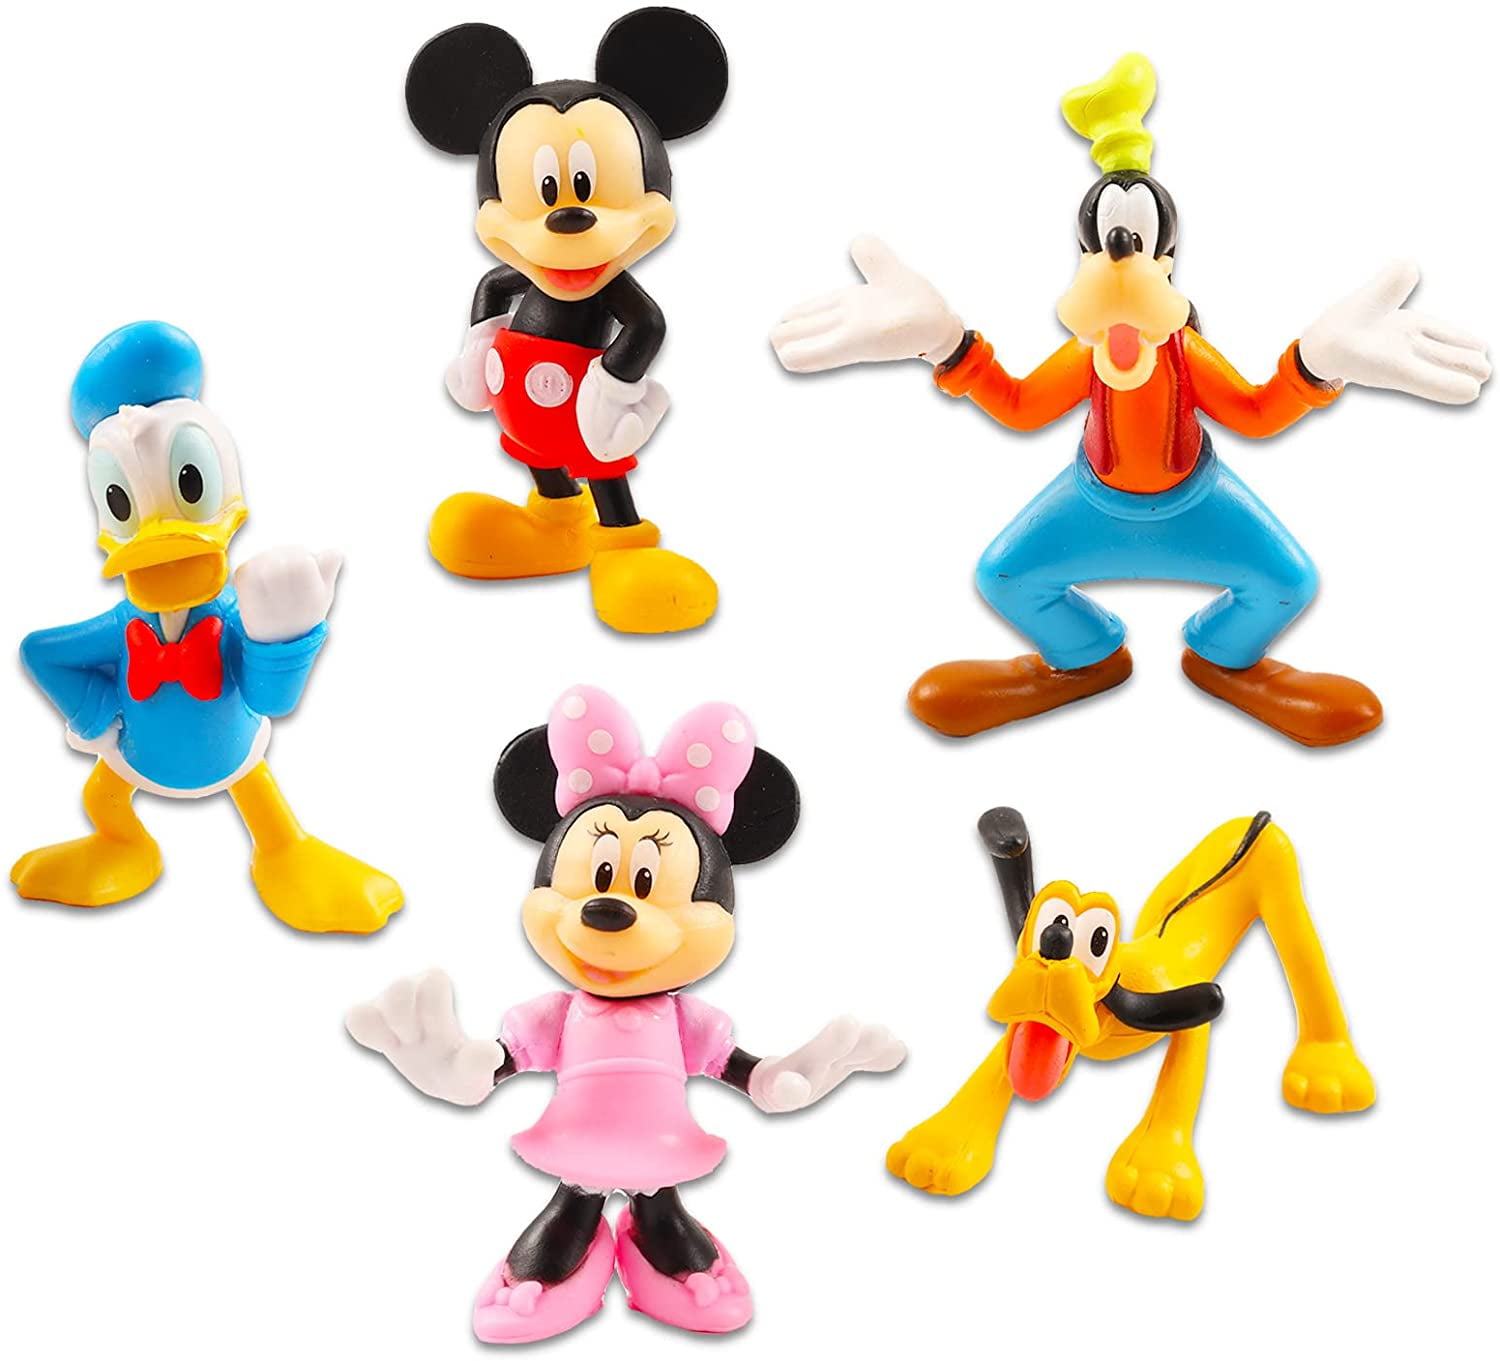 surgeon axis unrelated Disney Mickey and Friends Mini Figures 5 Pack, Mickey-Minnie-Donald-Goofy  and Pluto, 2" to 2.5" high. - Walmart.com